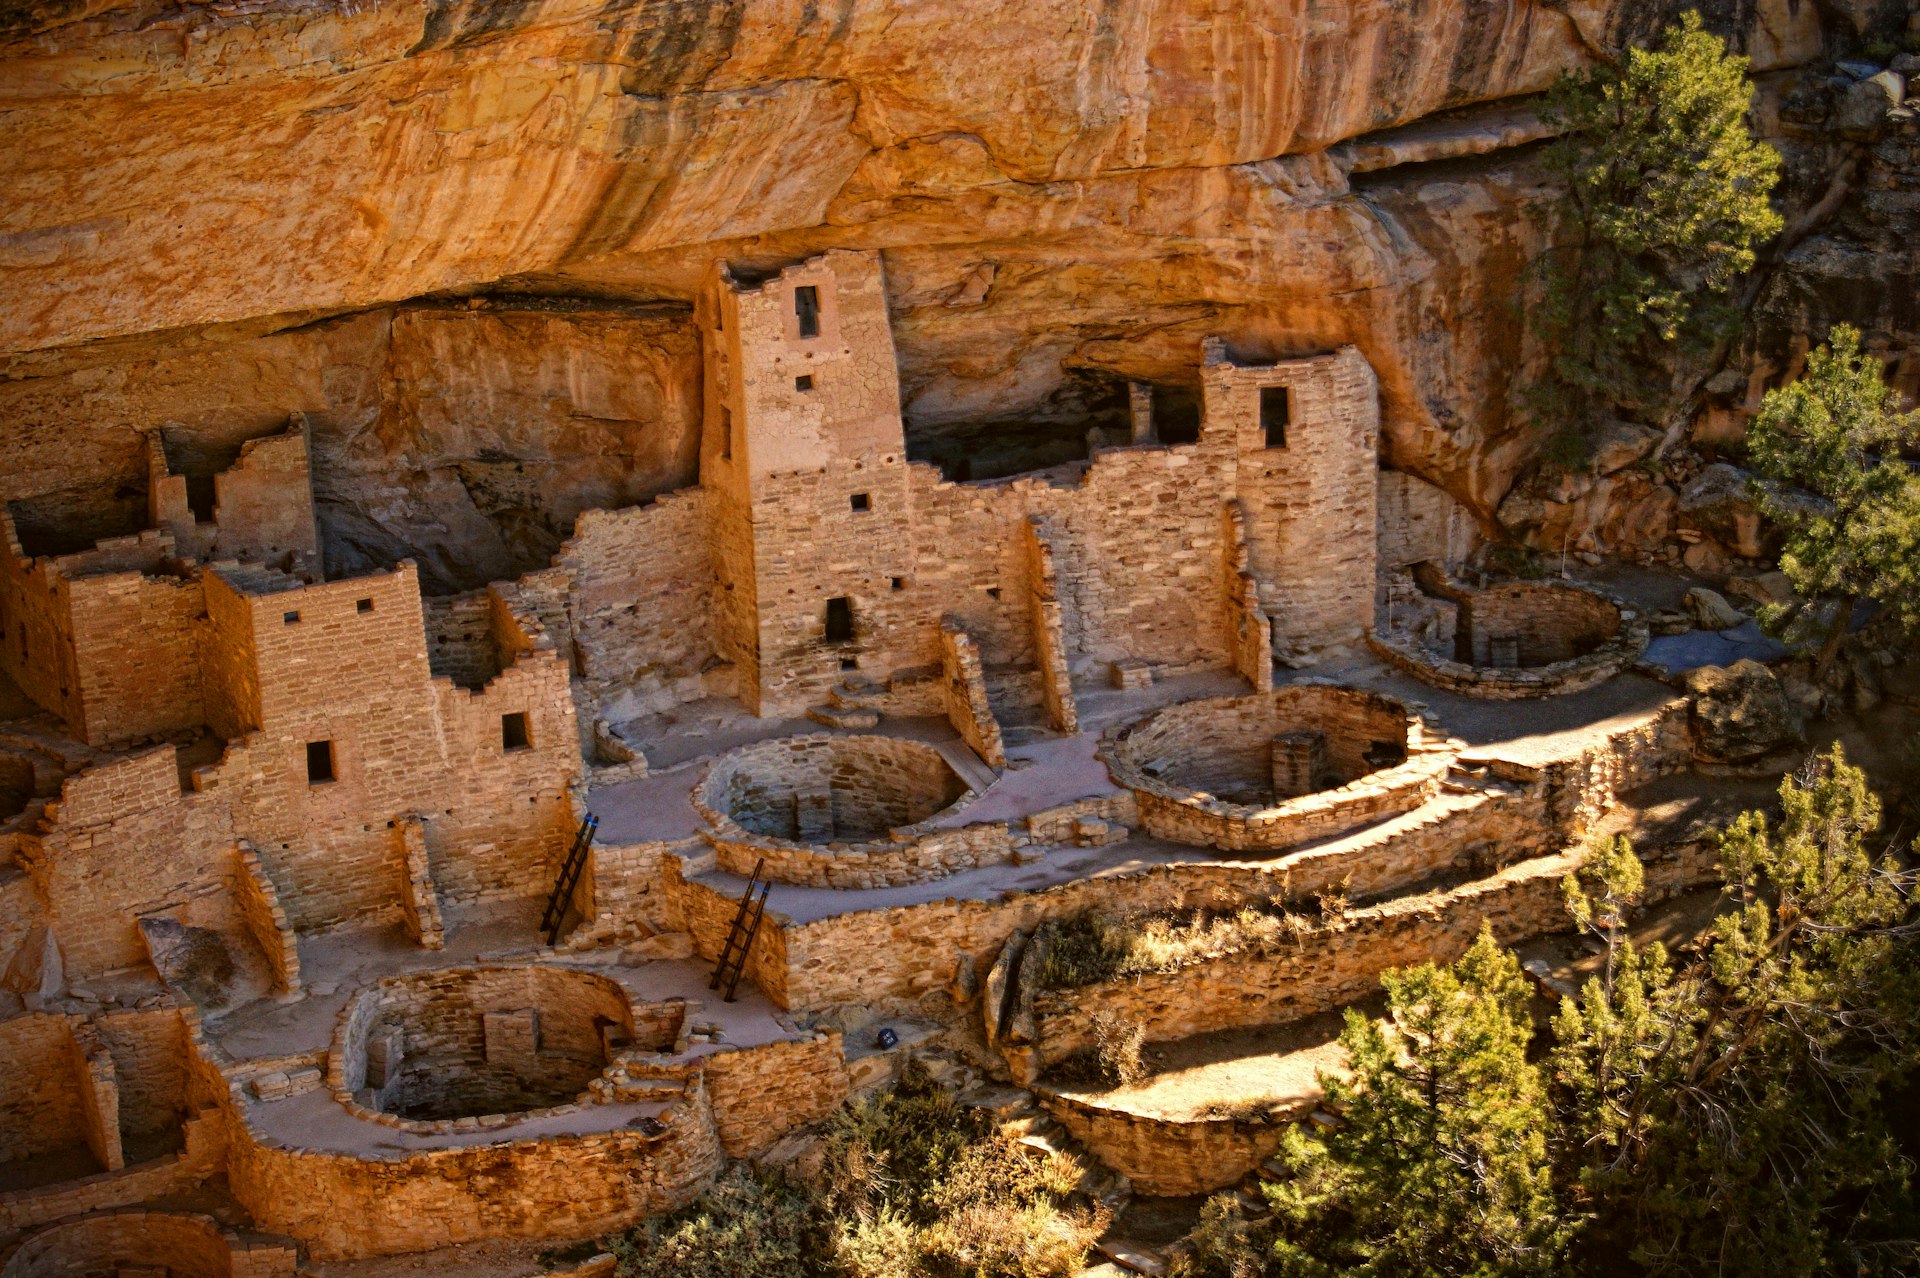 The iconic and mysterious Cliff Palace at Mesa Verde National Park. Image by www.infinitahighway.com.br / Moment / Getty